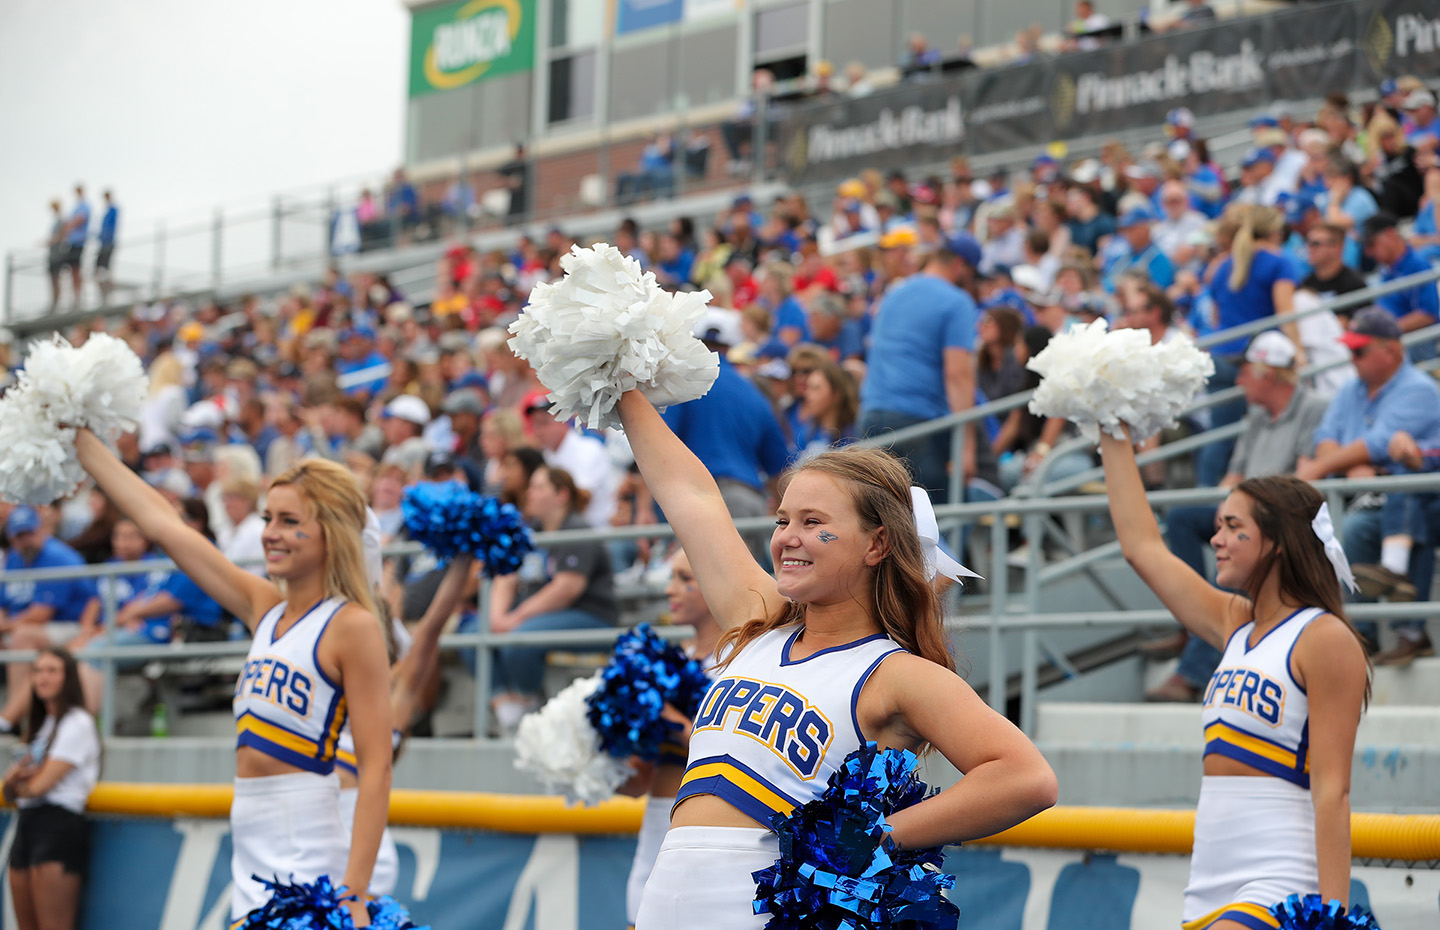 UNK football fans can cheer on the nationally-ranked Lopers when they face Northwest Missouri State at 2 p.m. Saturday, Oct. 29, during the homecoming game at Cope Stadium.